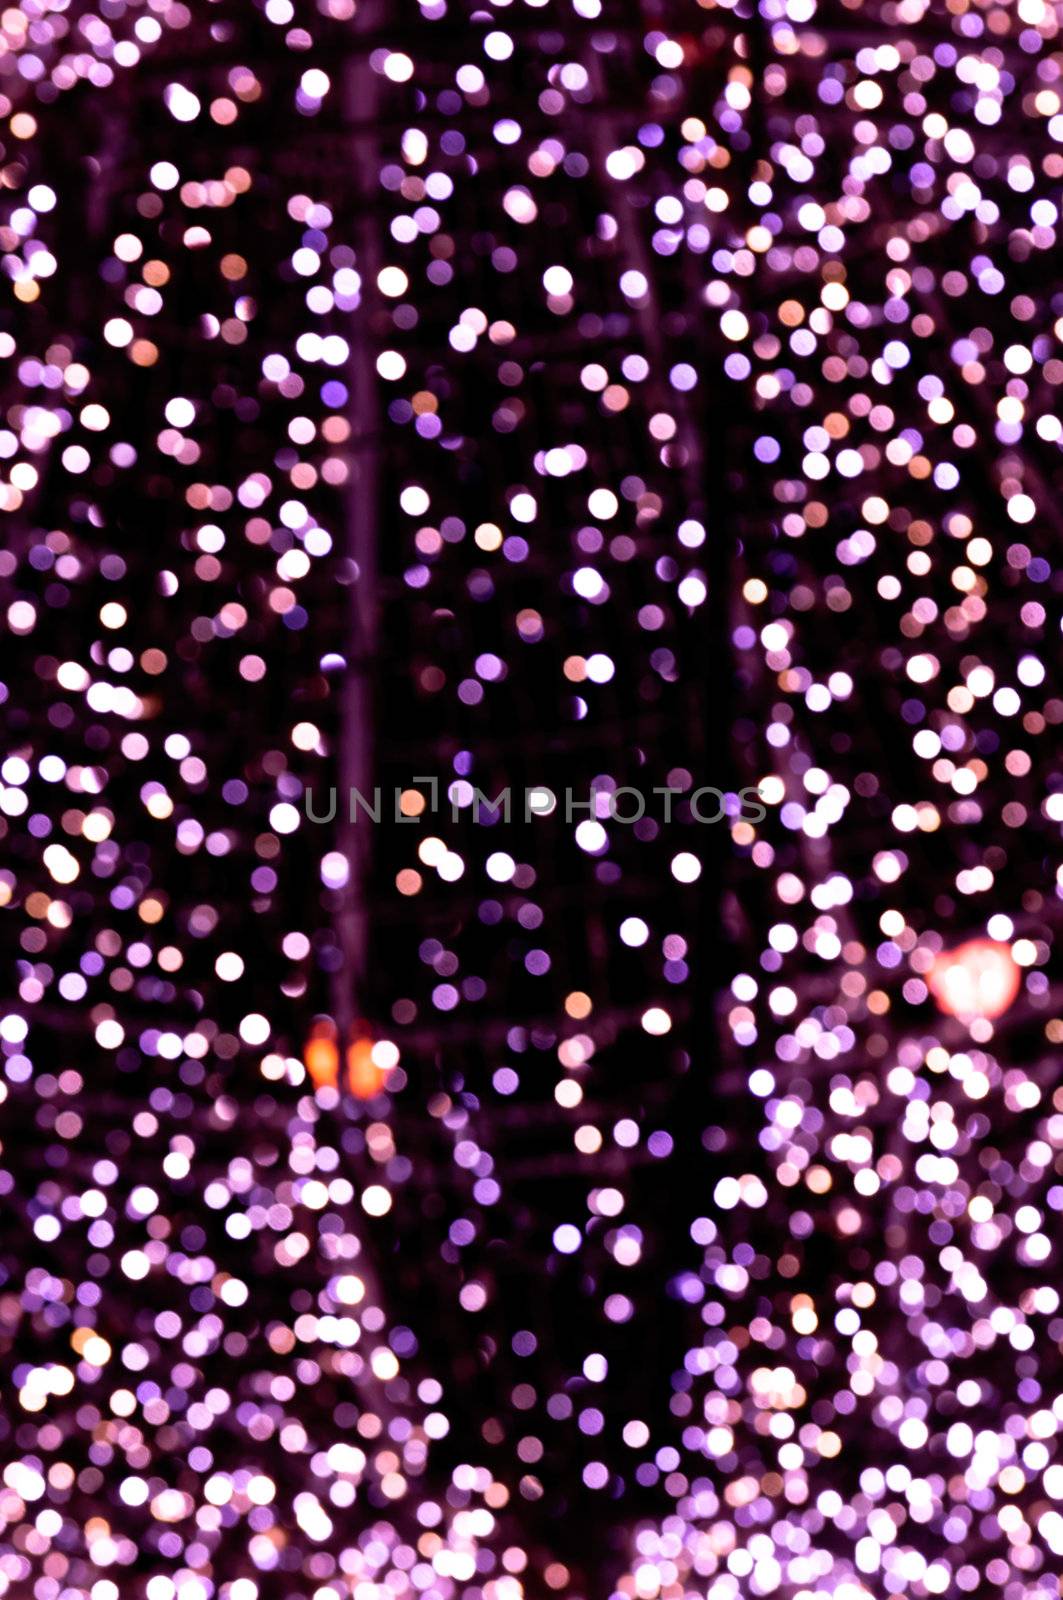 Out of focus dots background